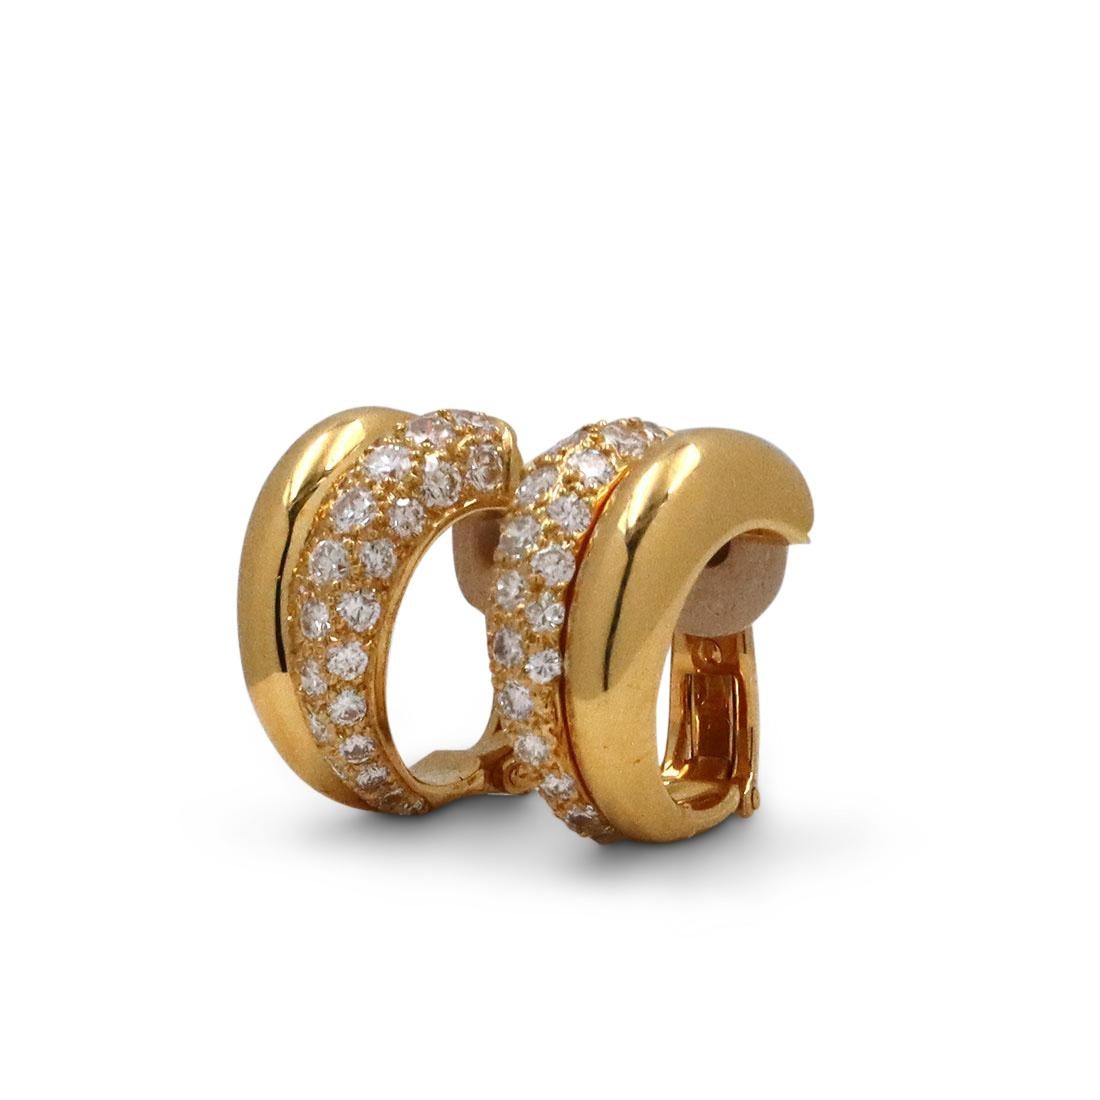 Authentic Cartier double hoop earrings crafted in 18 karat yellow gold.  One half of the split design is pave set with glittering round brilliant cut diamonds of approximately 1.10 total carat weight.  The other half is smooth, high polished gold